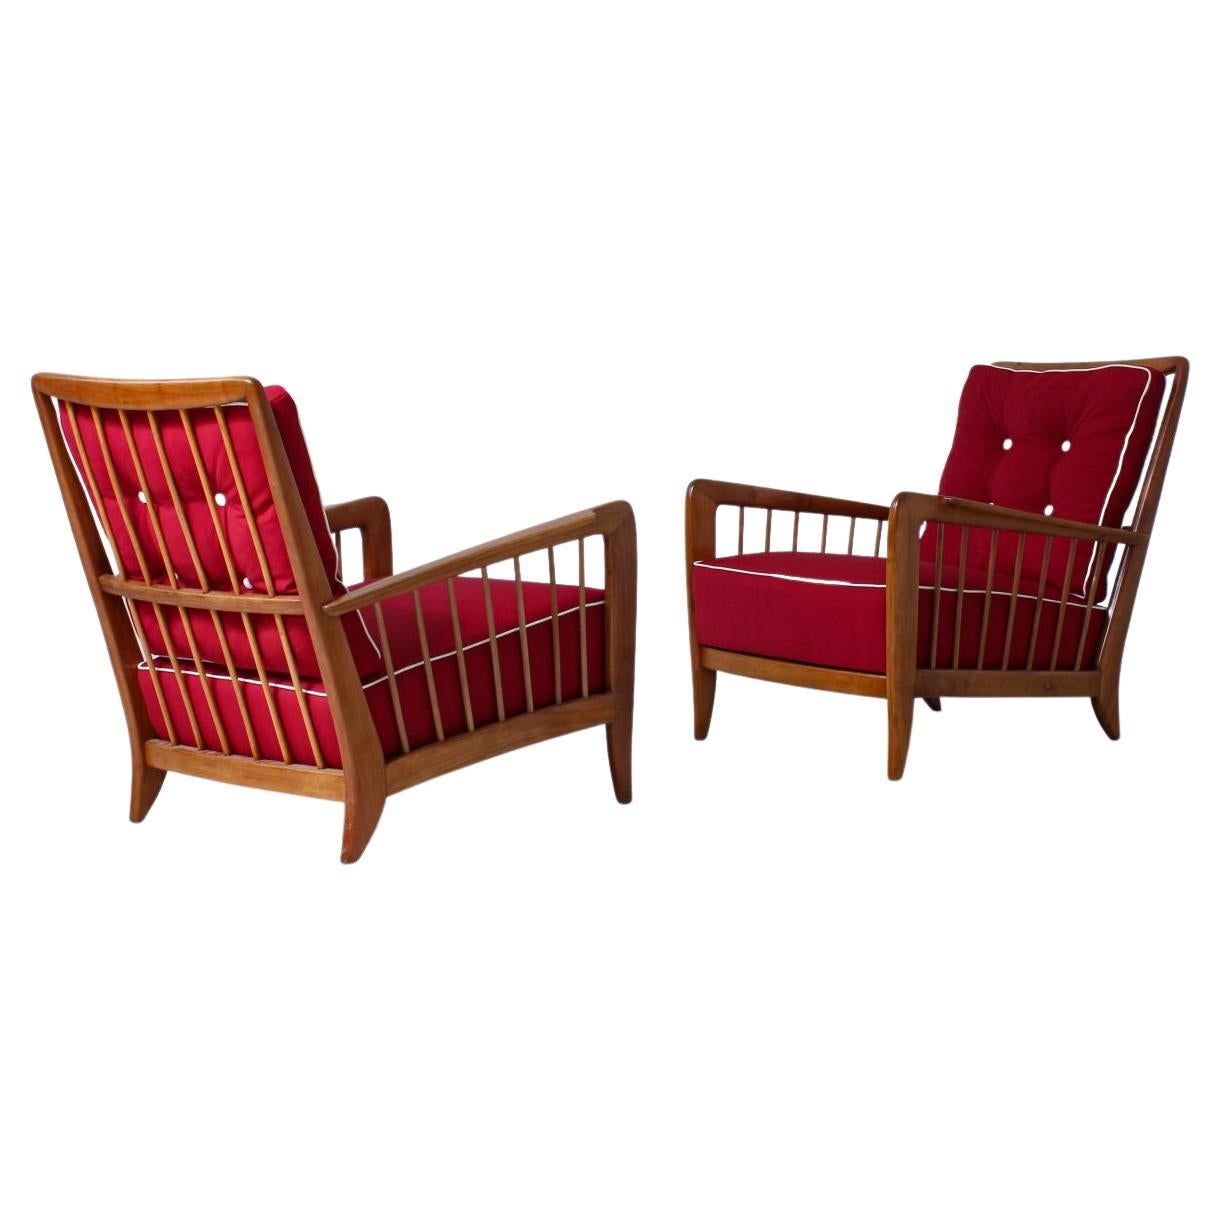 Rare Pair of Cherry Wood Armchairs by Paolo Buffa For Sale